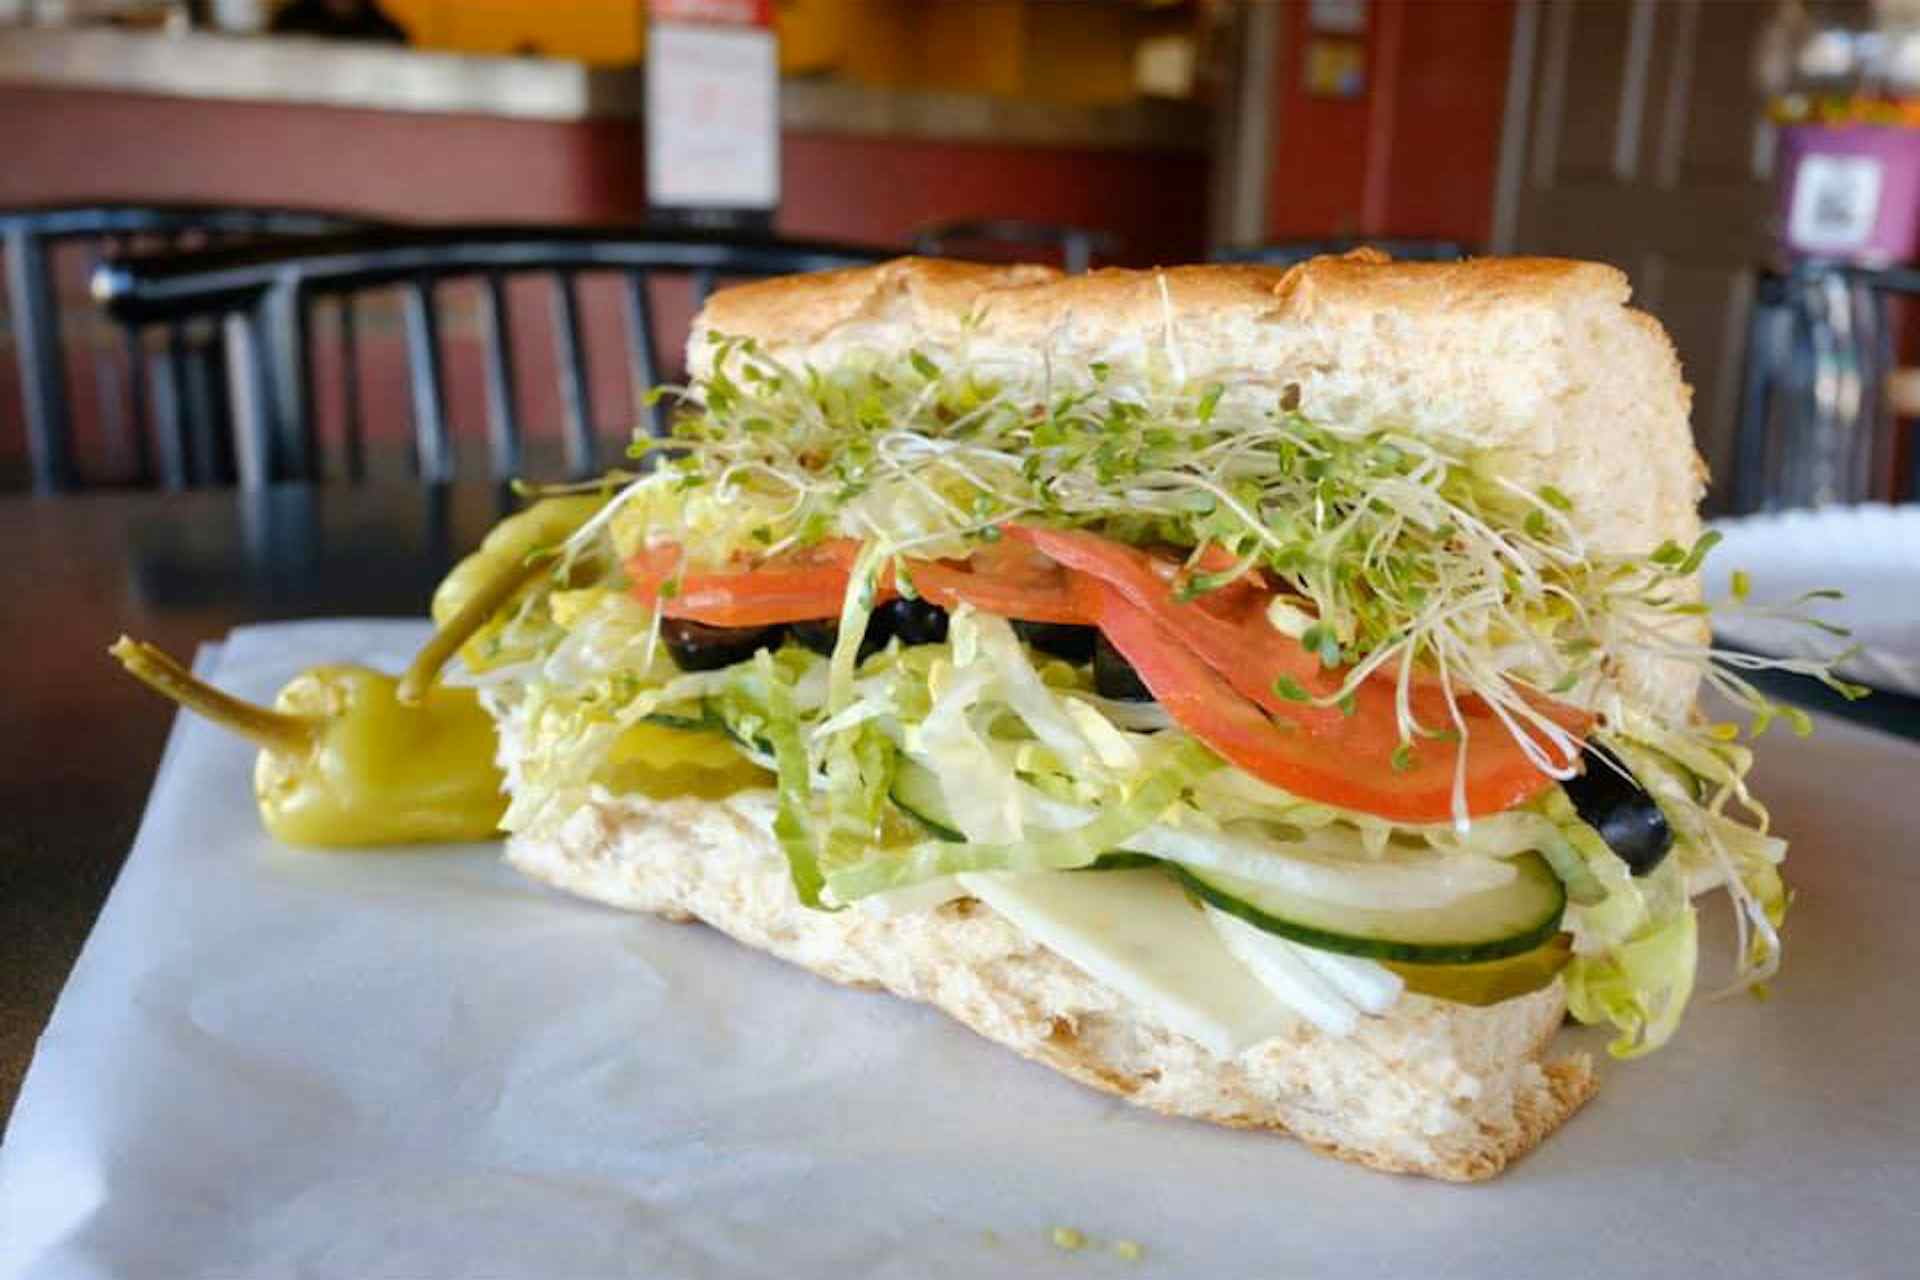 Fresh-made sandwich with pickles, tomatoes, and a hefty amount of greens served at the Sandwich Tree in Idaho Falls, Idaho of the Yellowstone Teton Territory